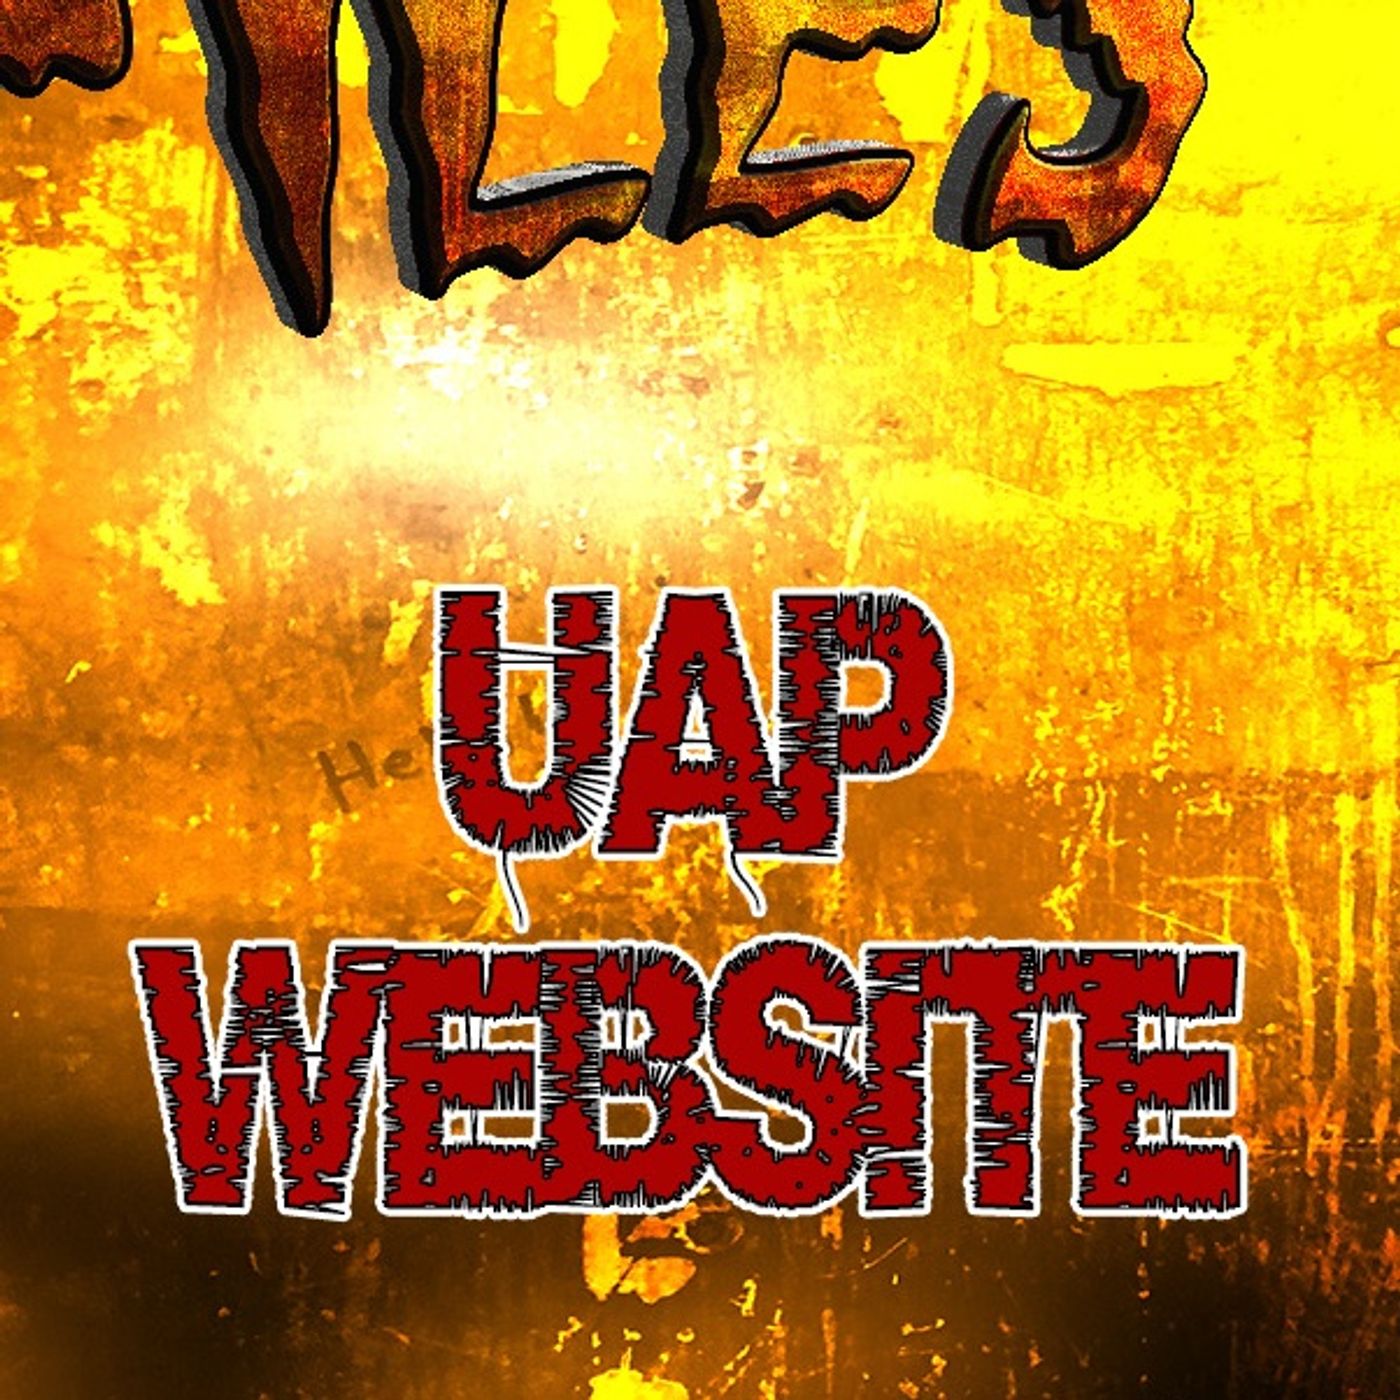 S362: The new government UAP website.